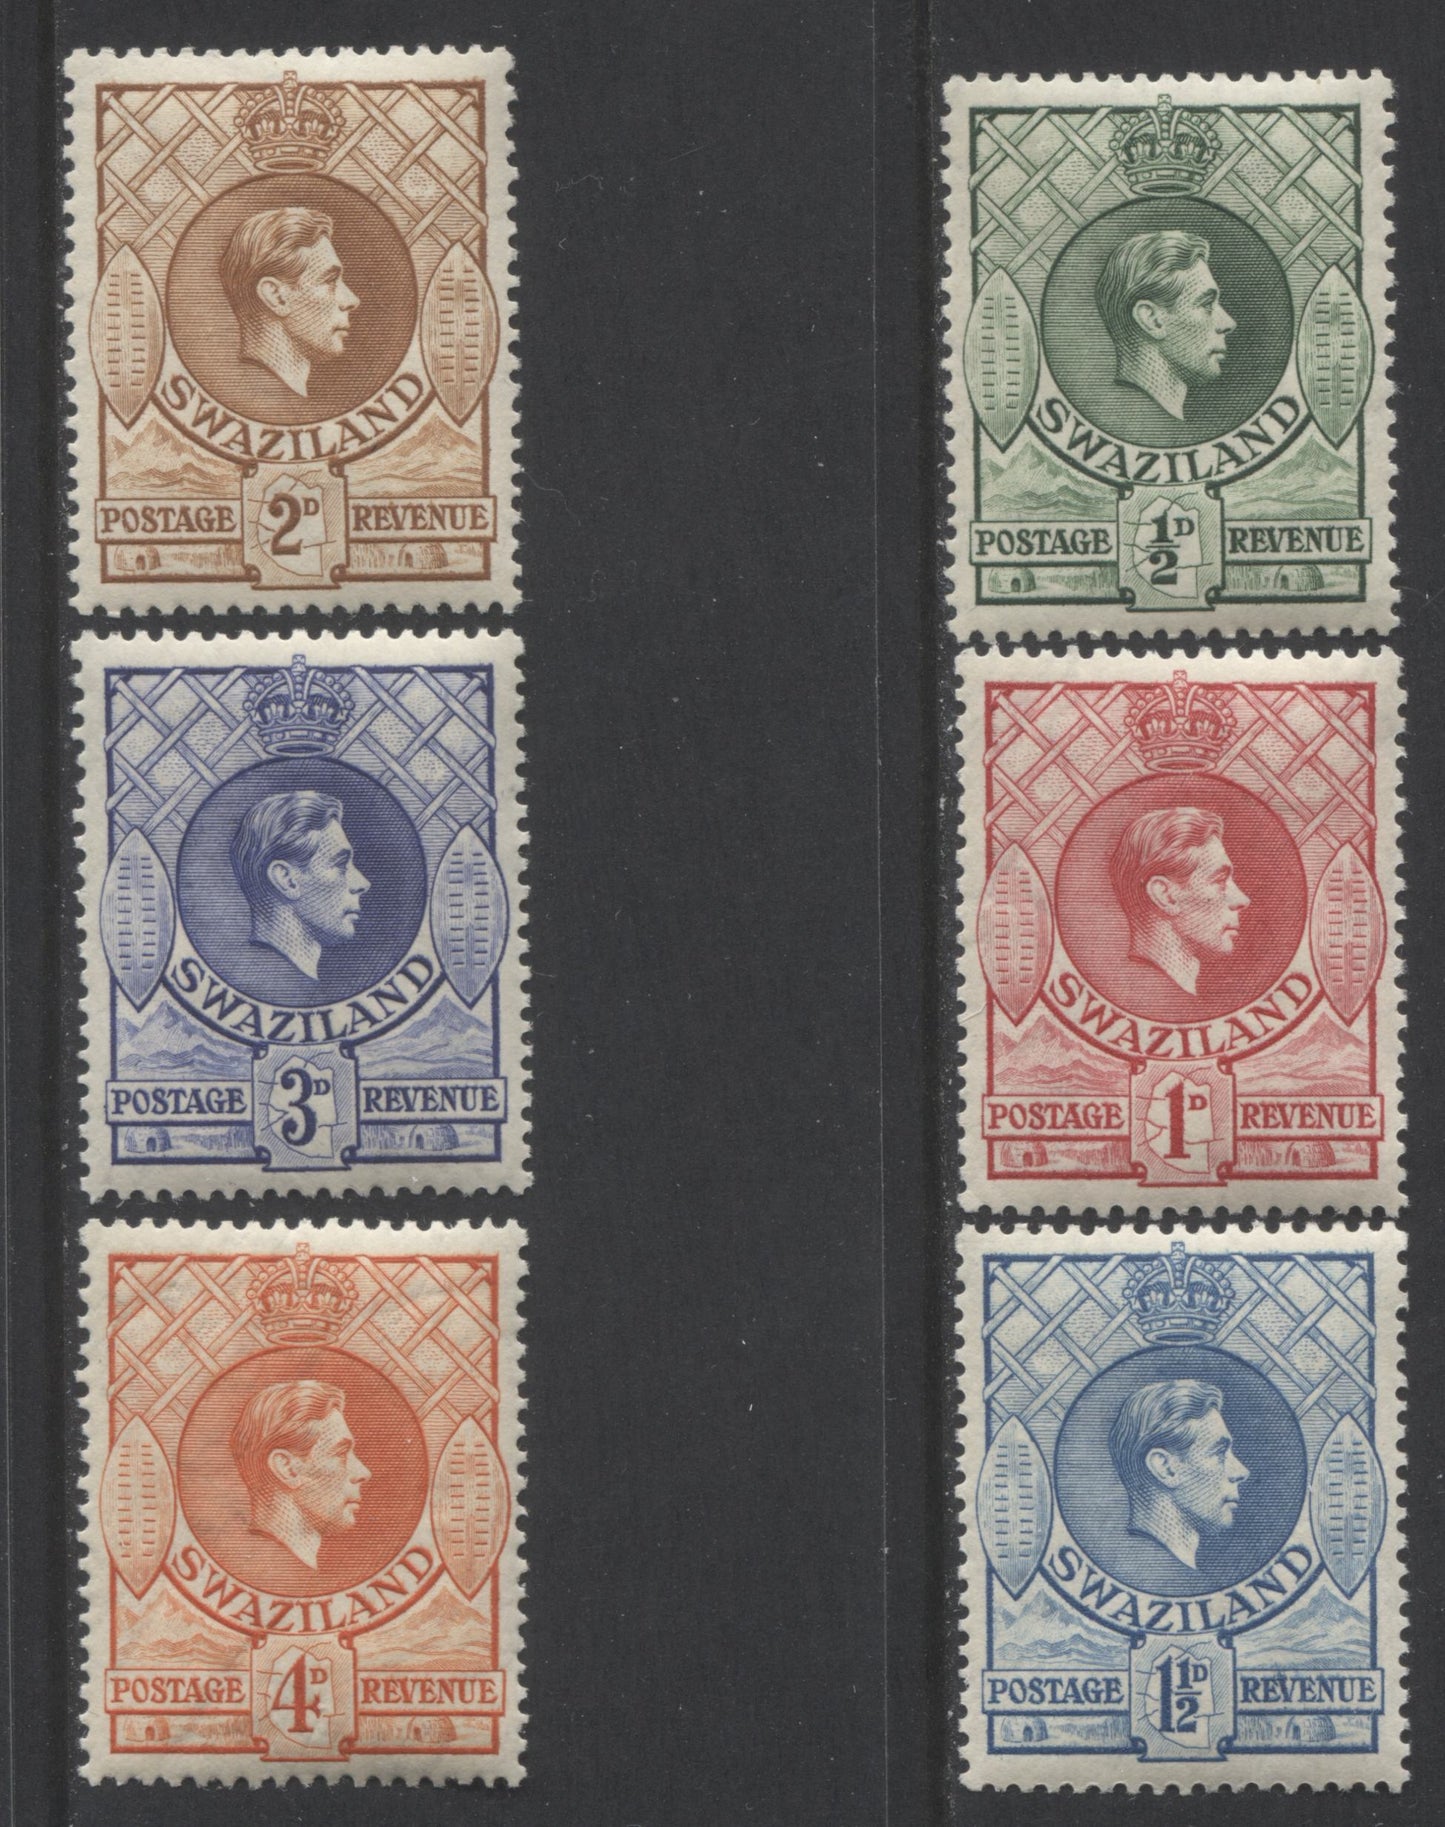 Lot 69 Swaziland SC#27a-32a32.75 (SG#28-33), 1938-1954 King George VI Profile Issue, A Partial VFNH Set Ranging From 1/2d to 4d, Perf 13.5 x 13, Scarce 1938 Printings, 2022 Scott Classic Cat. $32.75